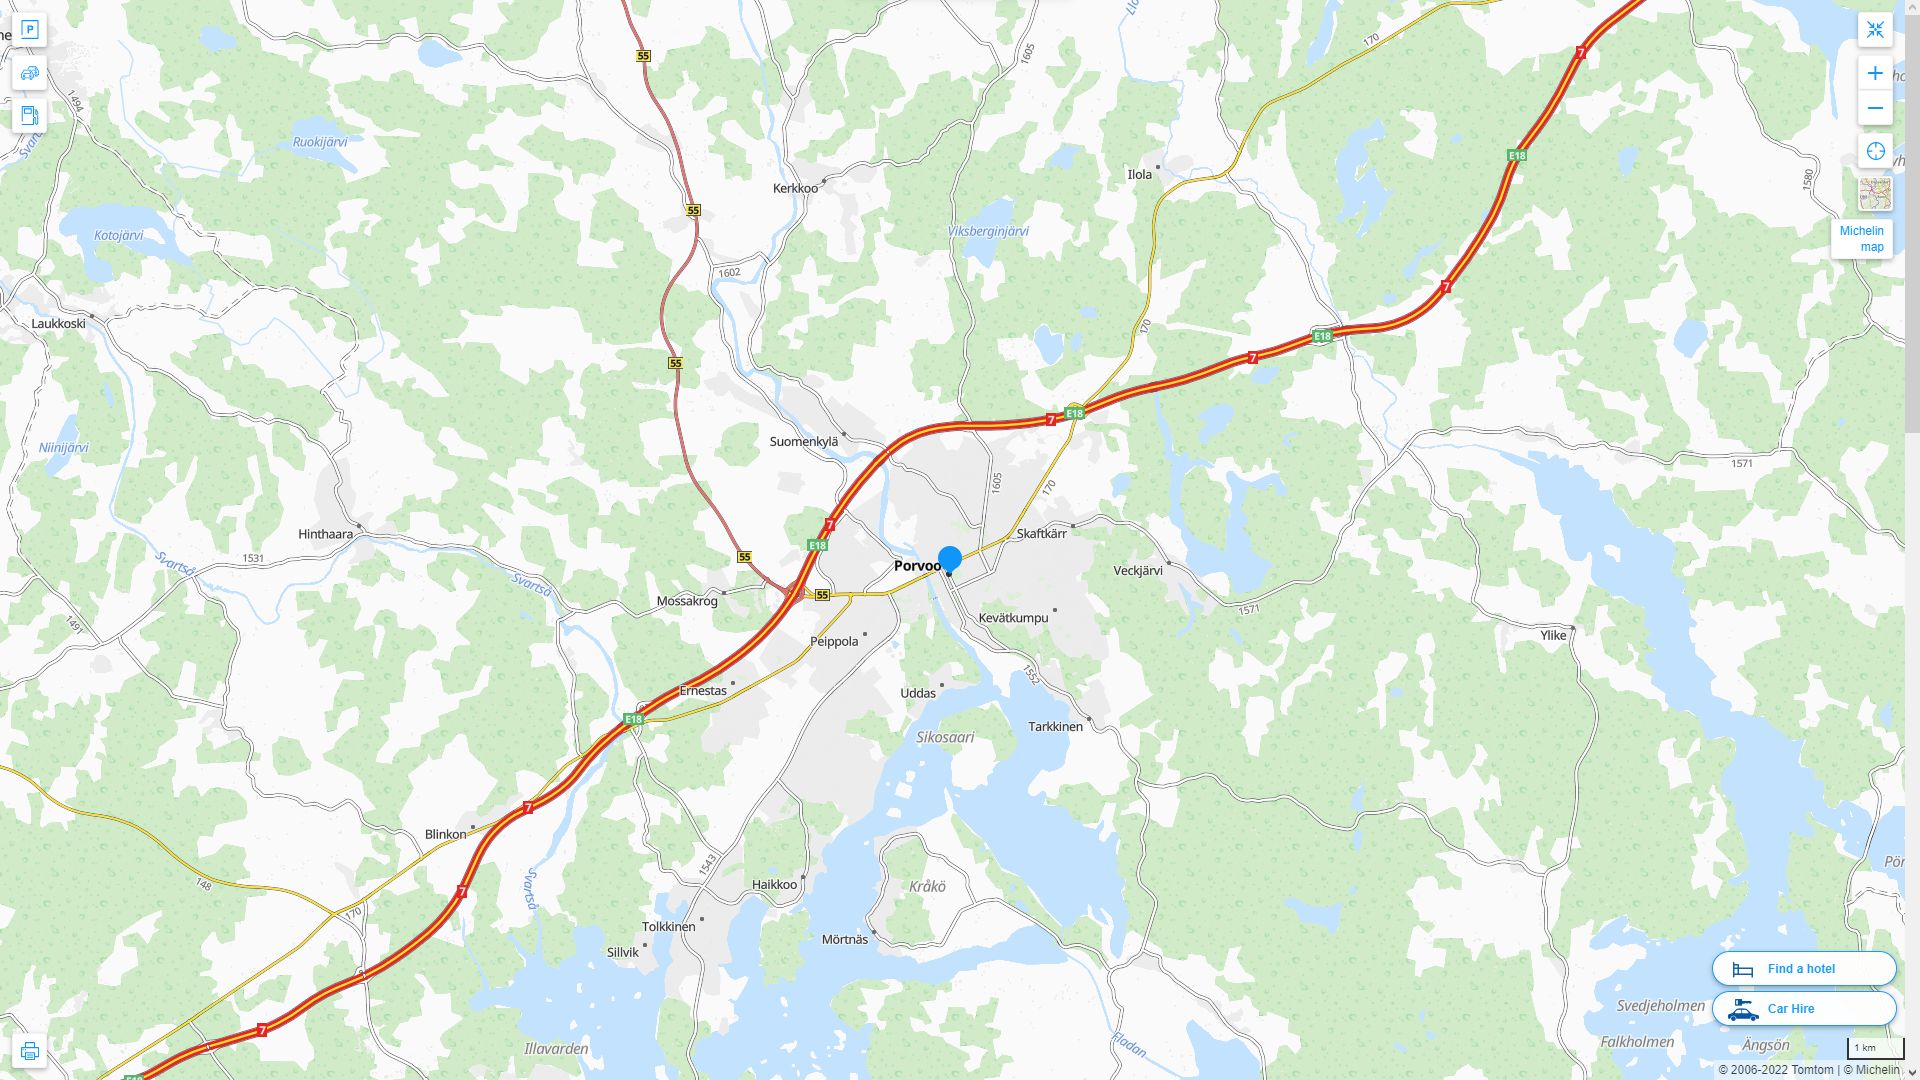 Porvoo Highway and Road Map